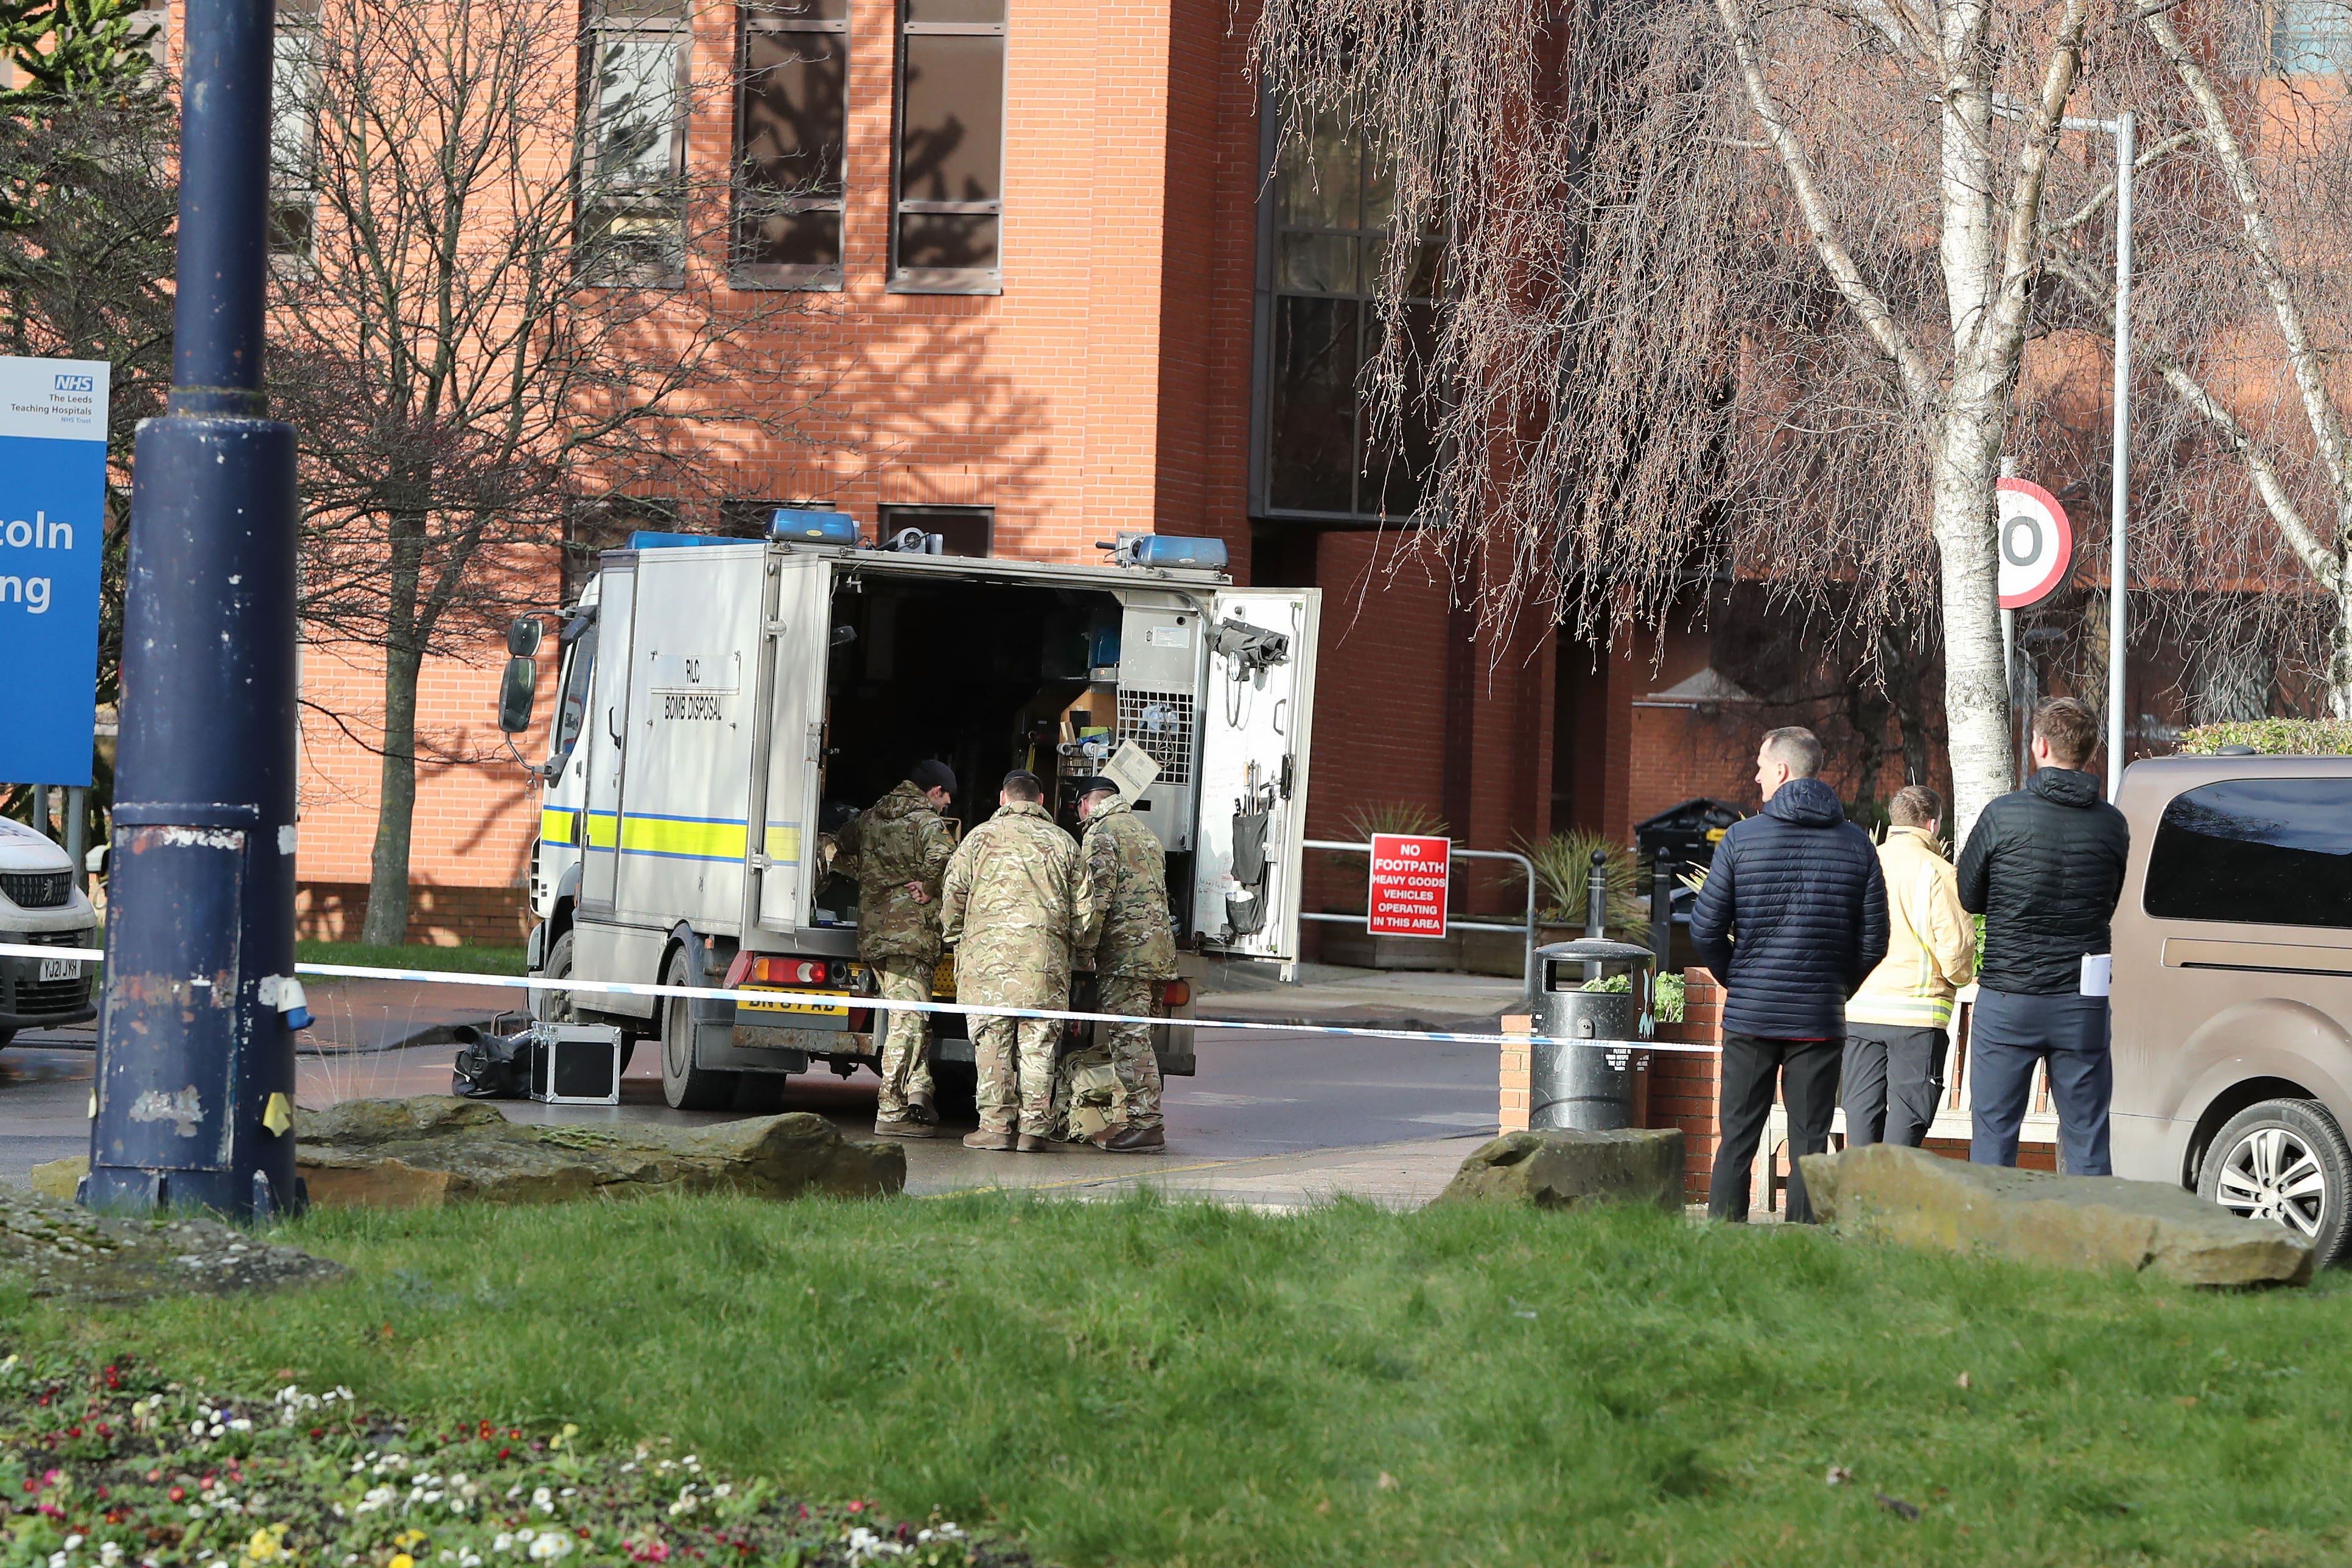 Army specialists and a bomb disposal unit attended the scene at St James’s Hospital in Leeds on Friday (Ben Lack/PA)